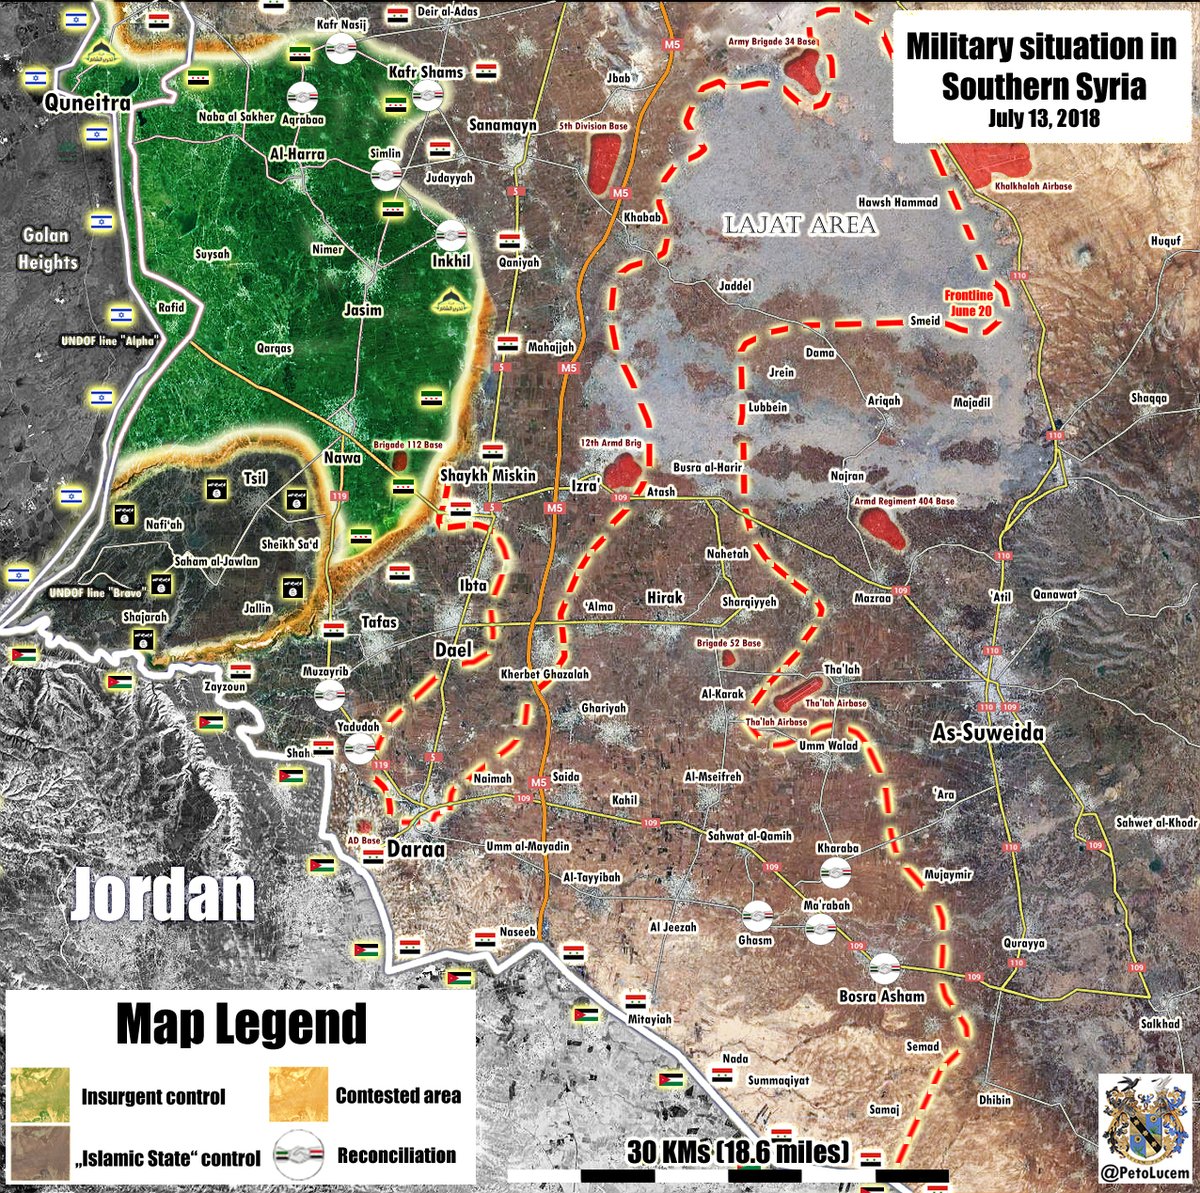 Syrian Millitary Resumes Its Advance In Western Daraa (Map)